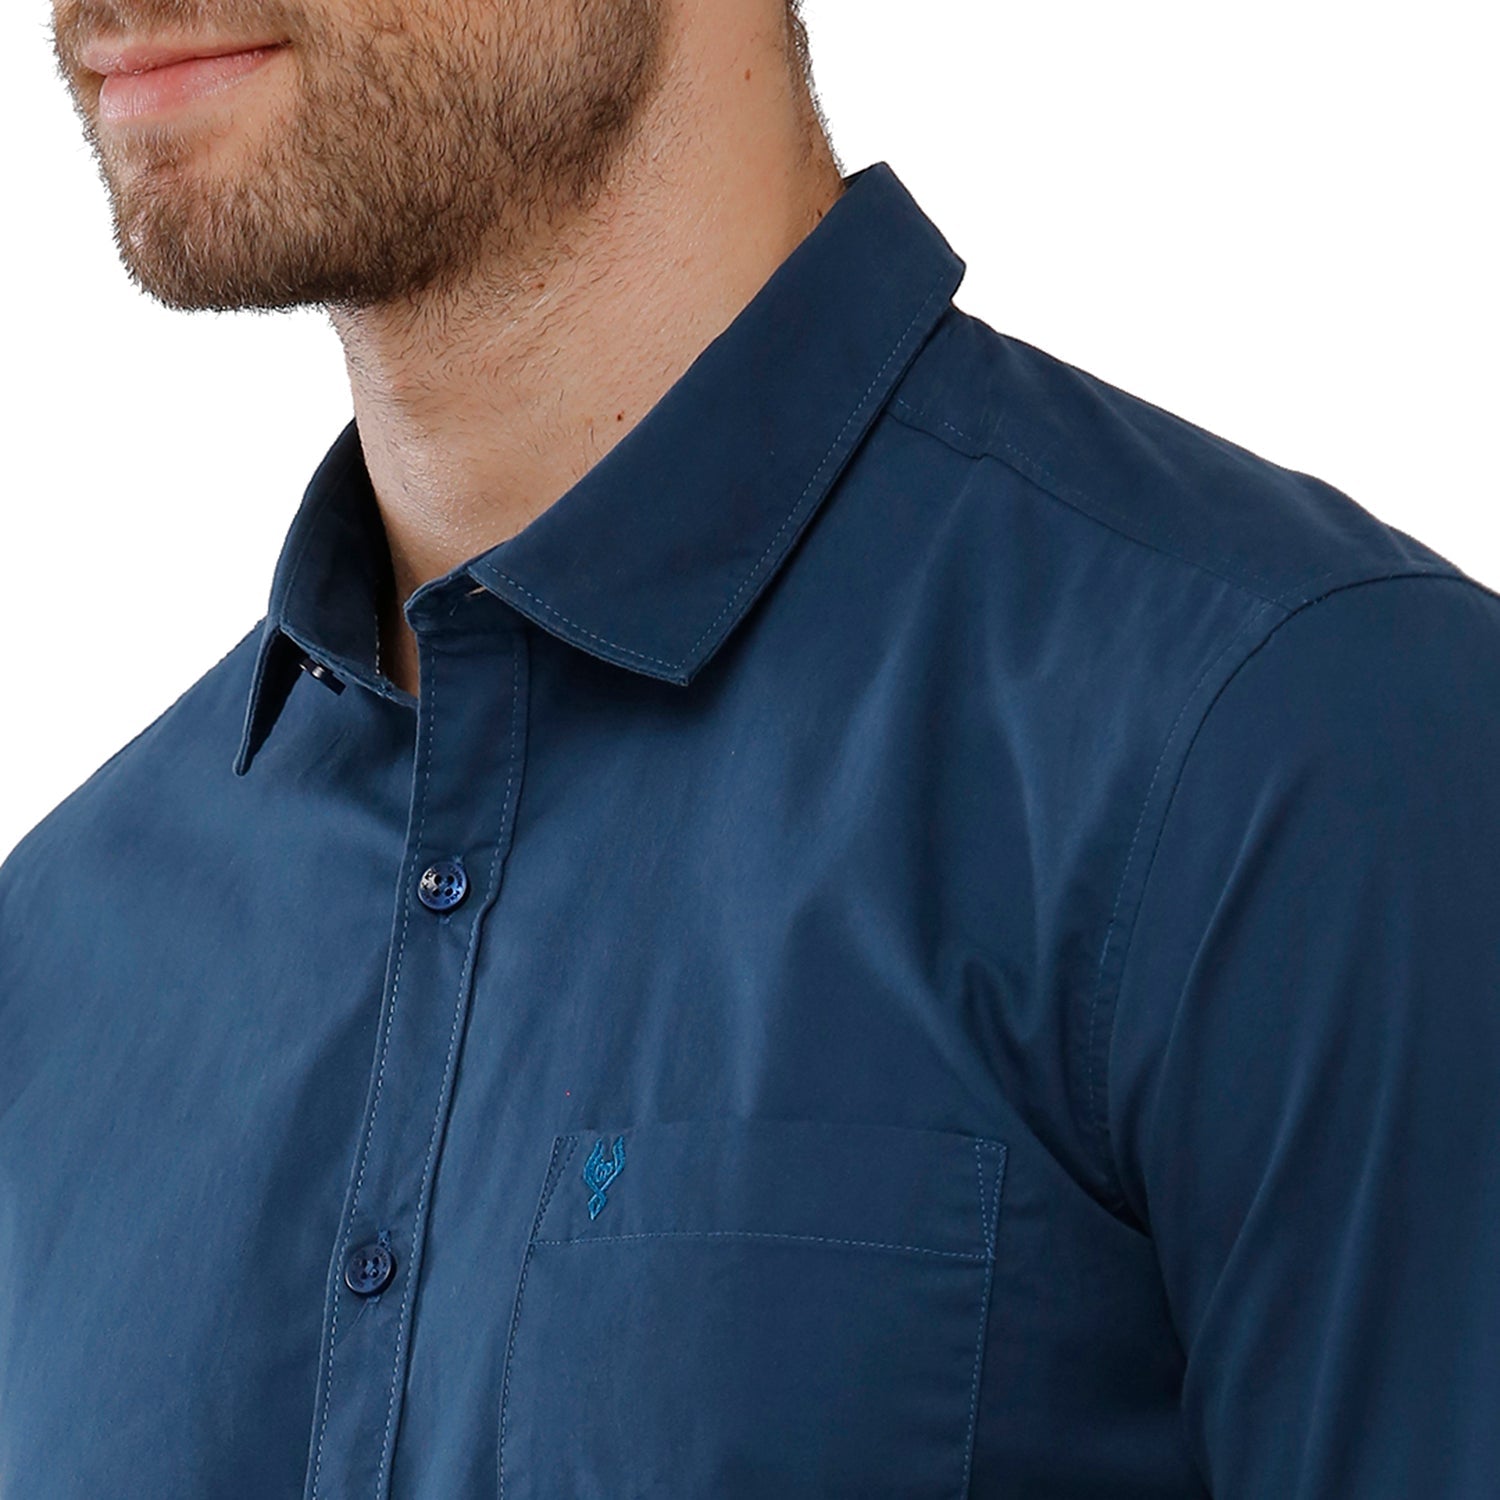 Classic Polo Mens 100% Cotton Solid Slim Fit Navy Blue Color Woven Shirt - SN1 115 E Shirts Classic Polo 